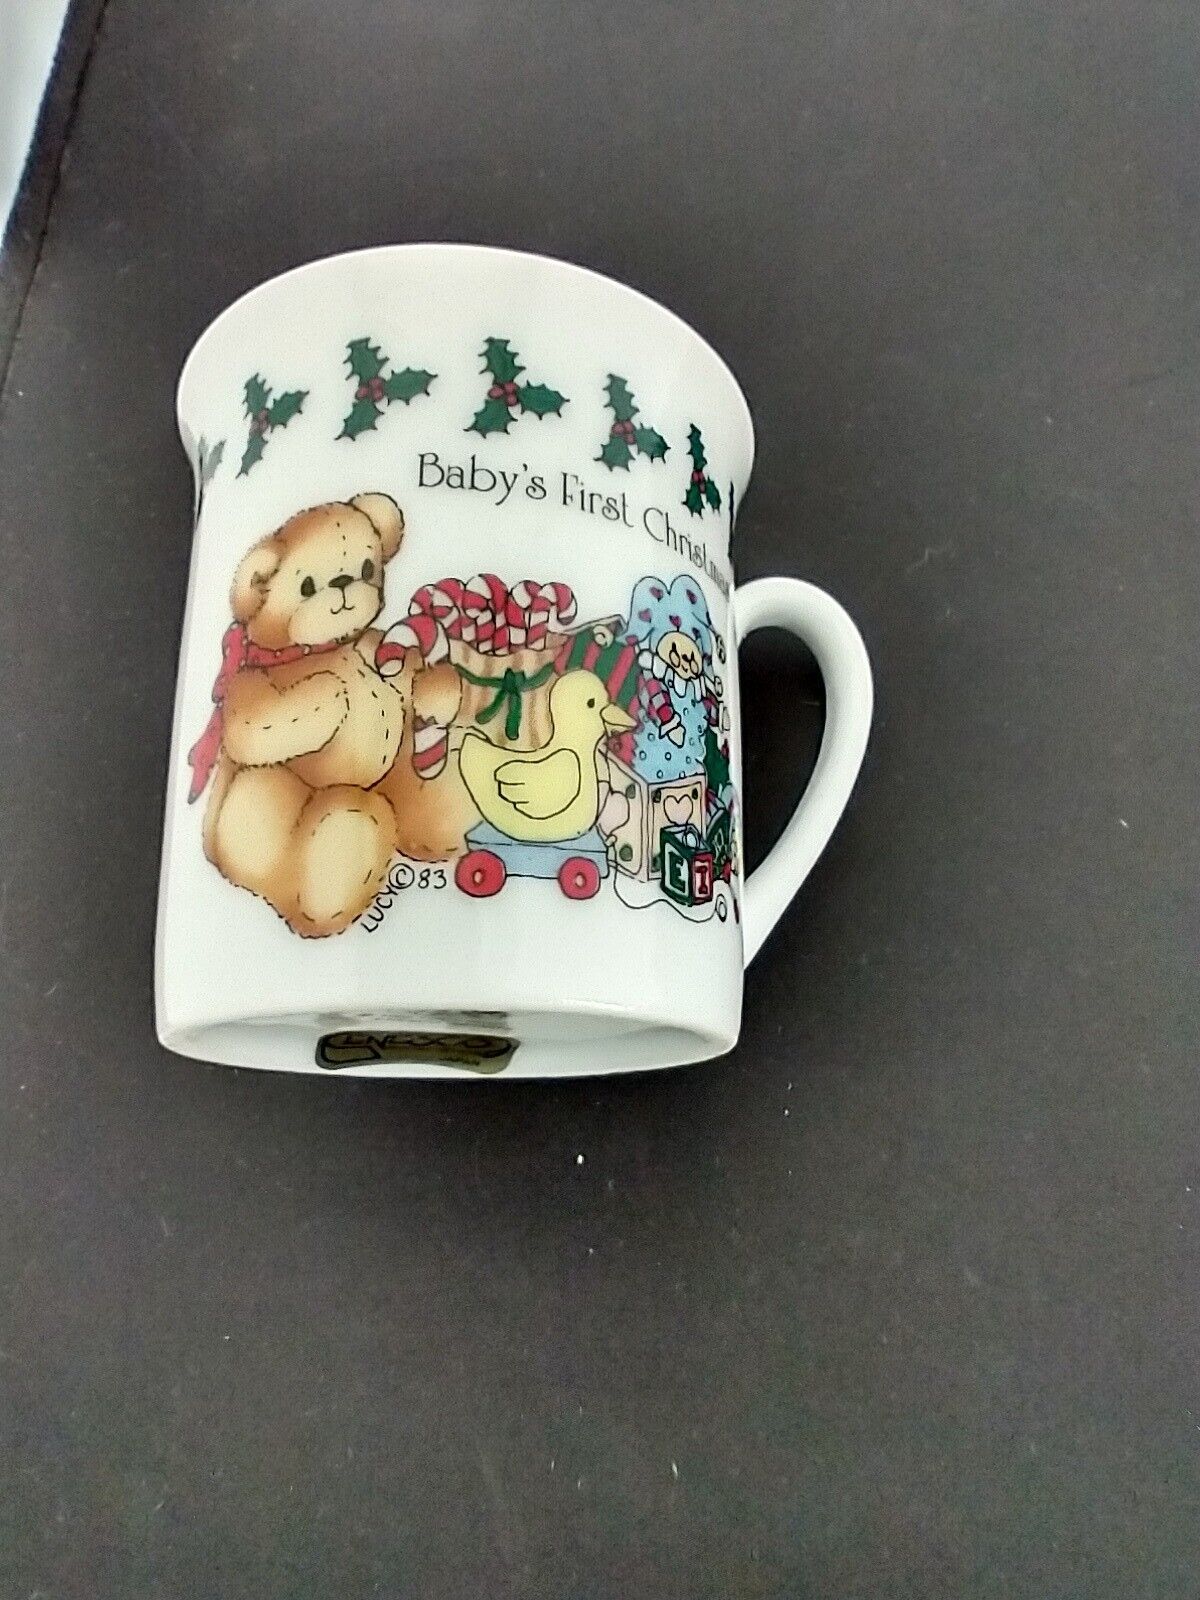 Vintage 1985 Enesco Lucy & Me Baby \'s First Christmas Cup, Good condition